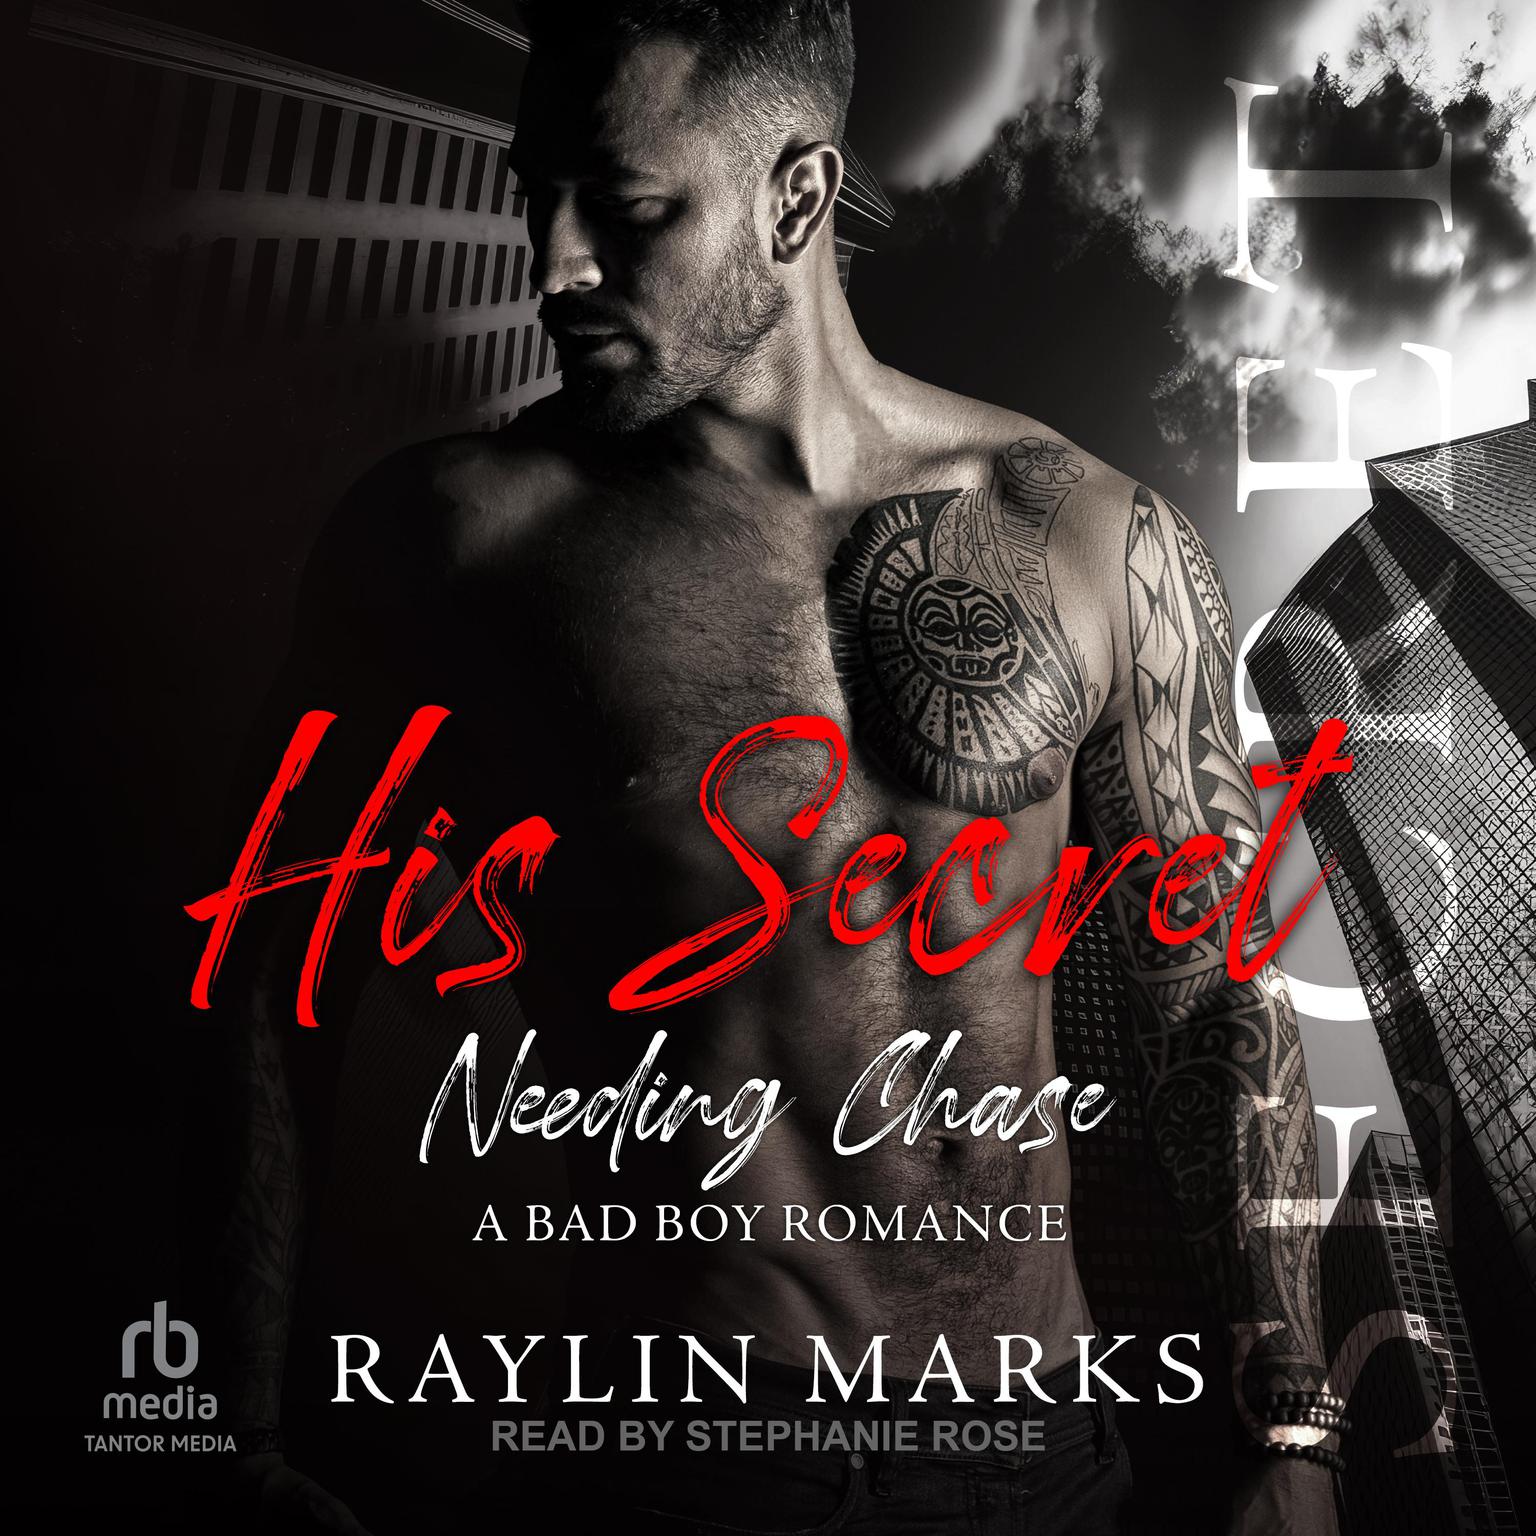 His Secret: Needing Chase A Bad Boy Romance Audiobook, by Raylin Marks